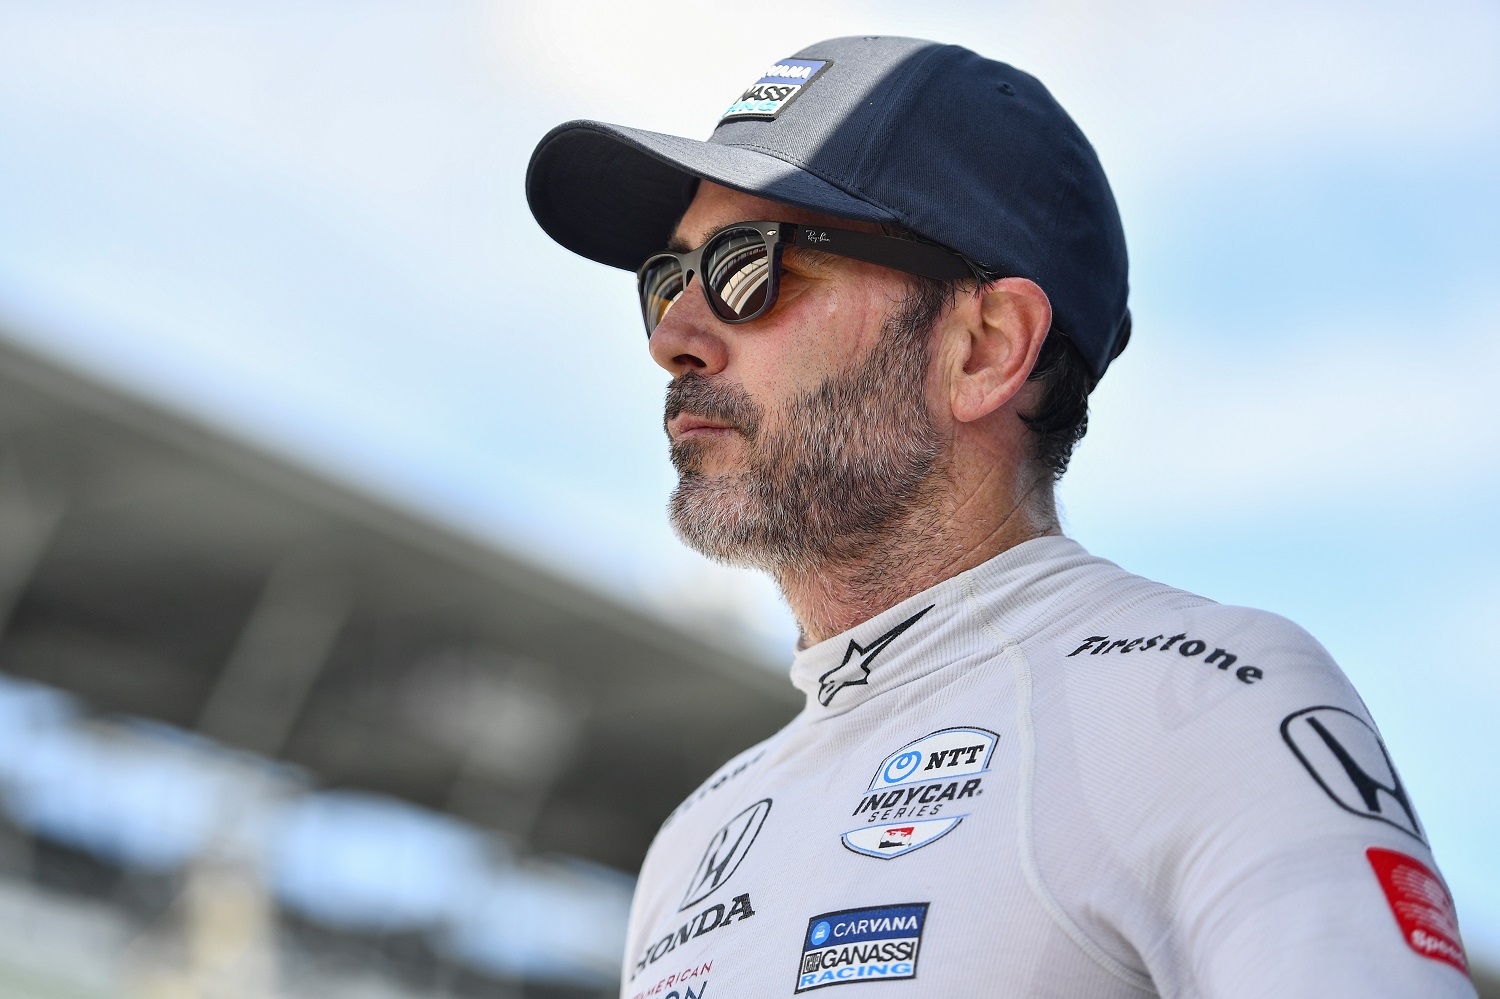 Jimmie Johnson looks on during practice for the NTT IndyCar Series Gallagher Grand Prix at Indianapolis Motor Speedway on July 29, 2022.